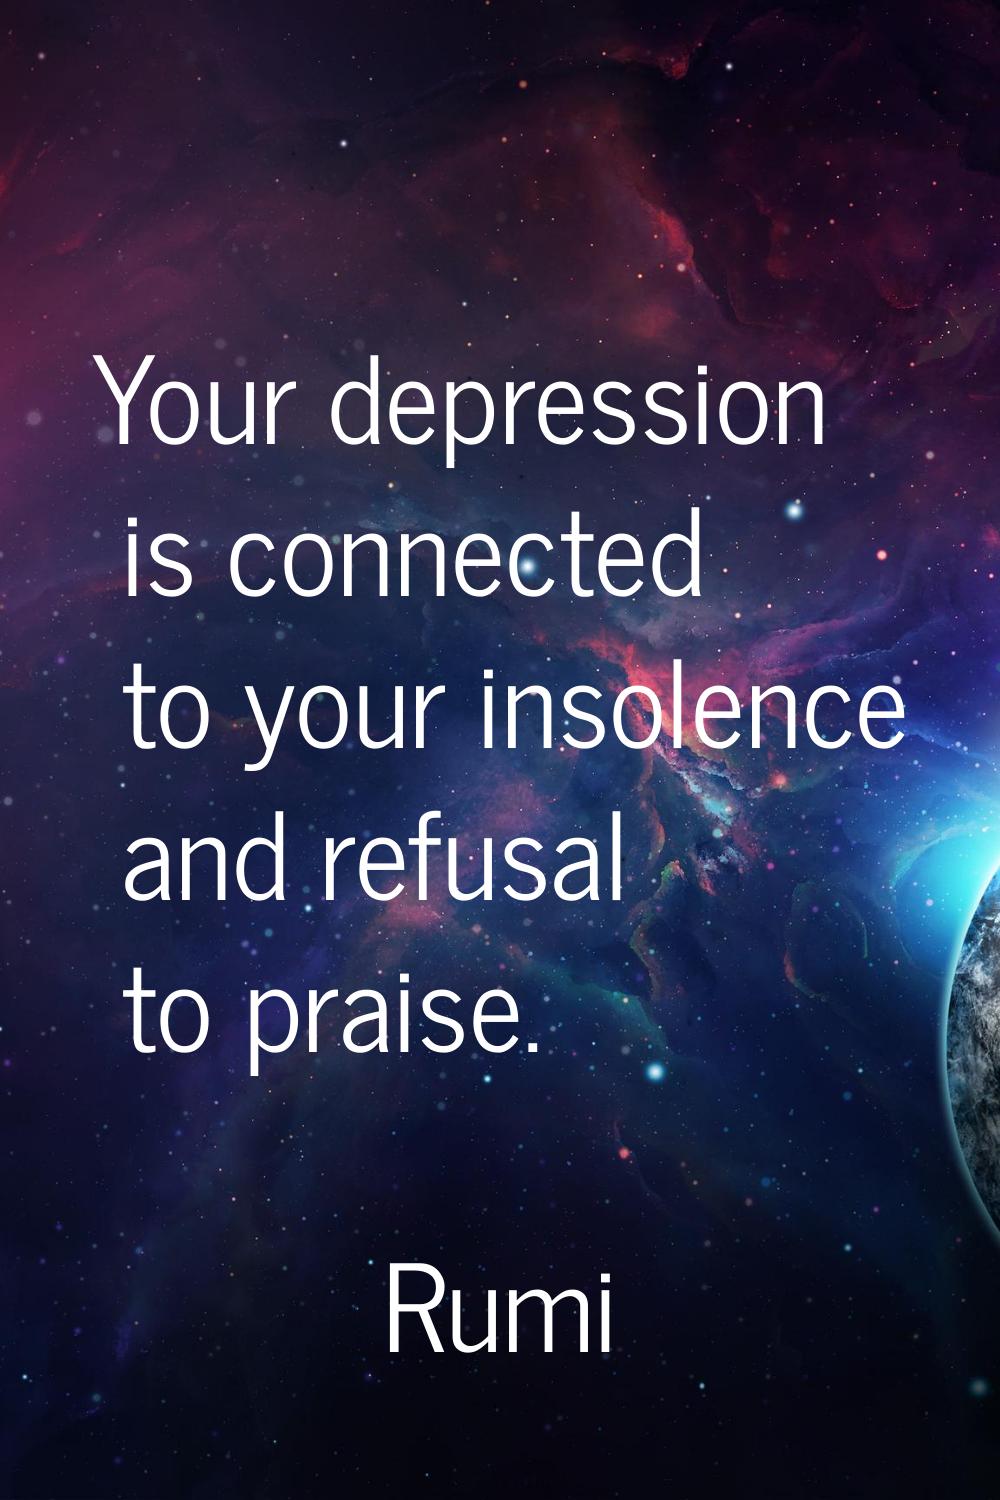 Your depression is connected to your insolence and refusal to praise.